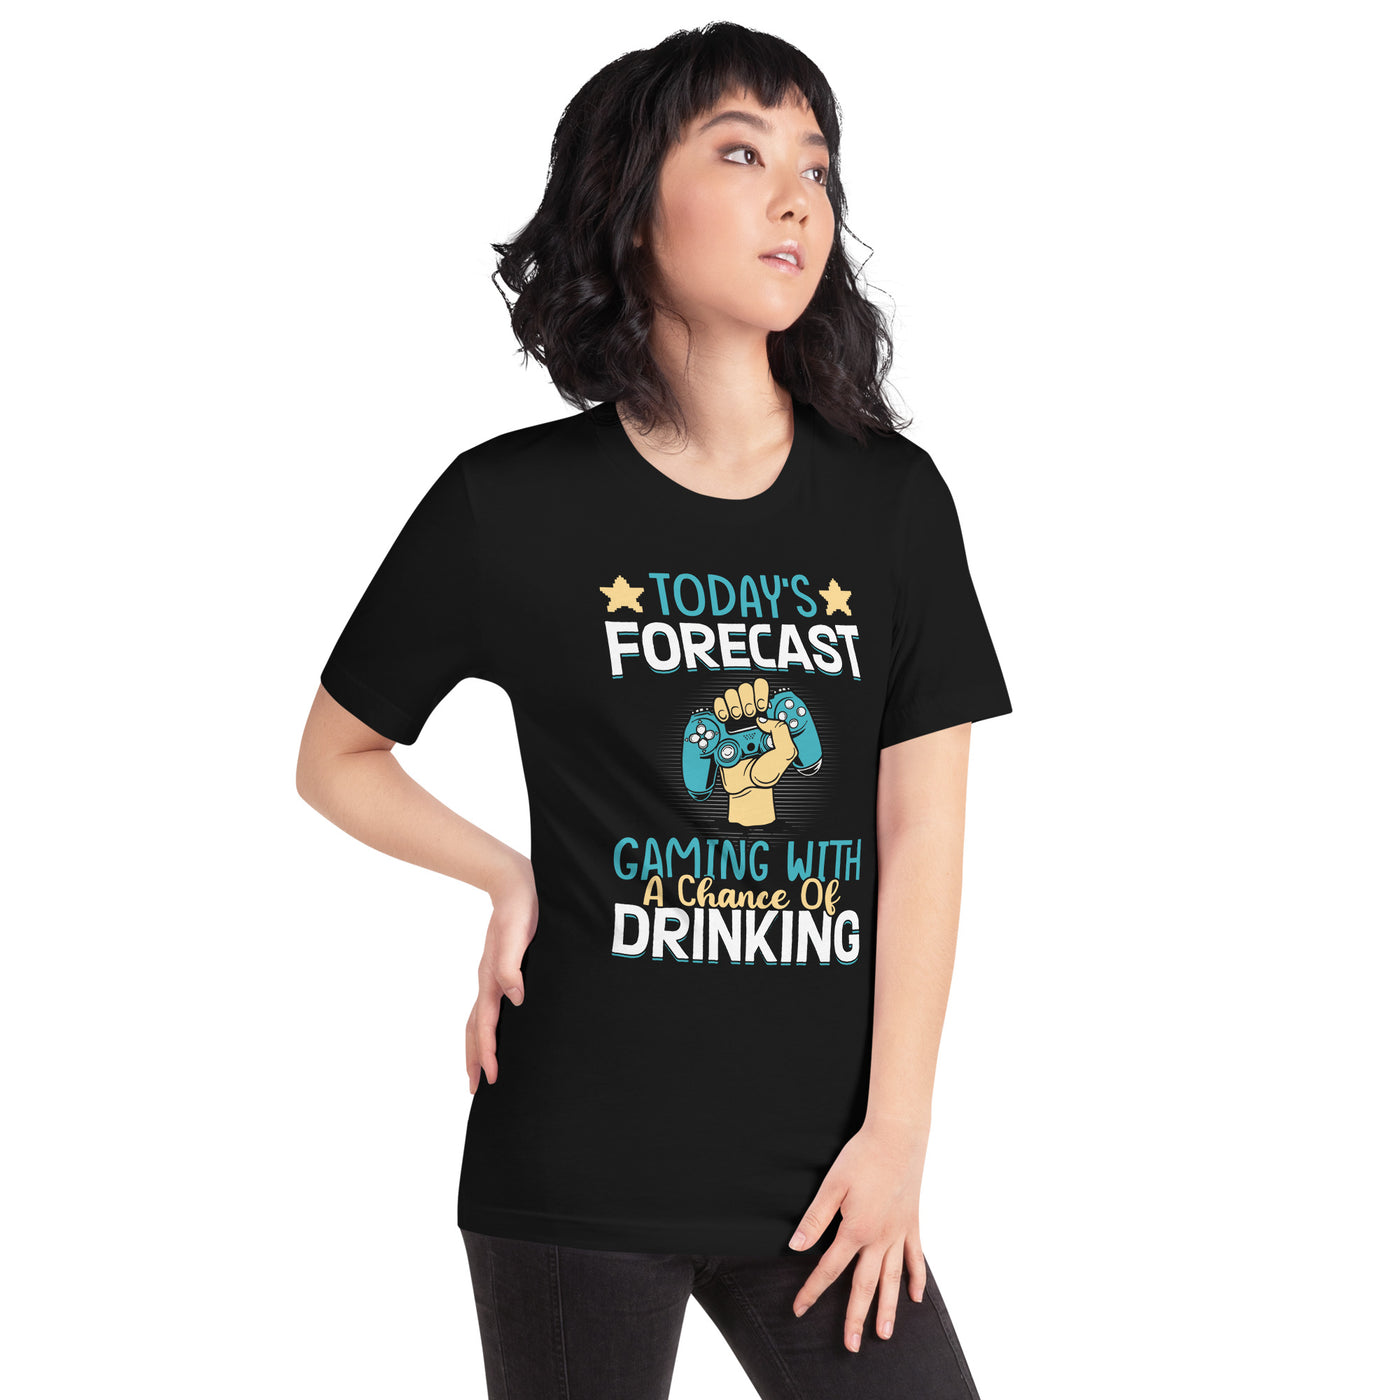 Today's Forecast - Gaming with a Chance of Drinking Unisex t-shirt